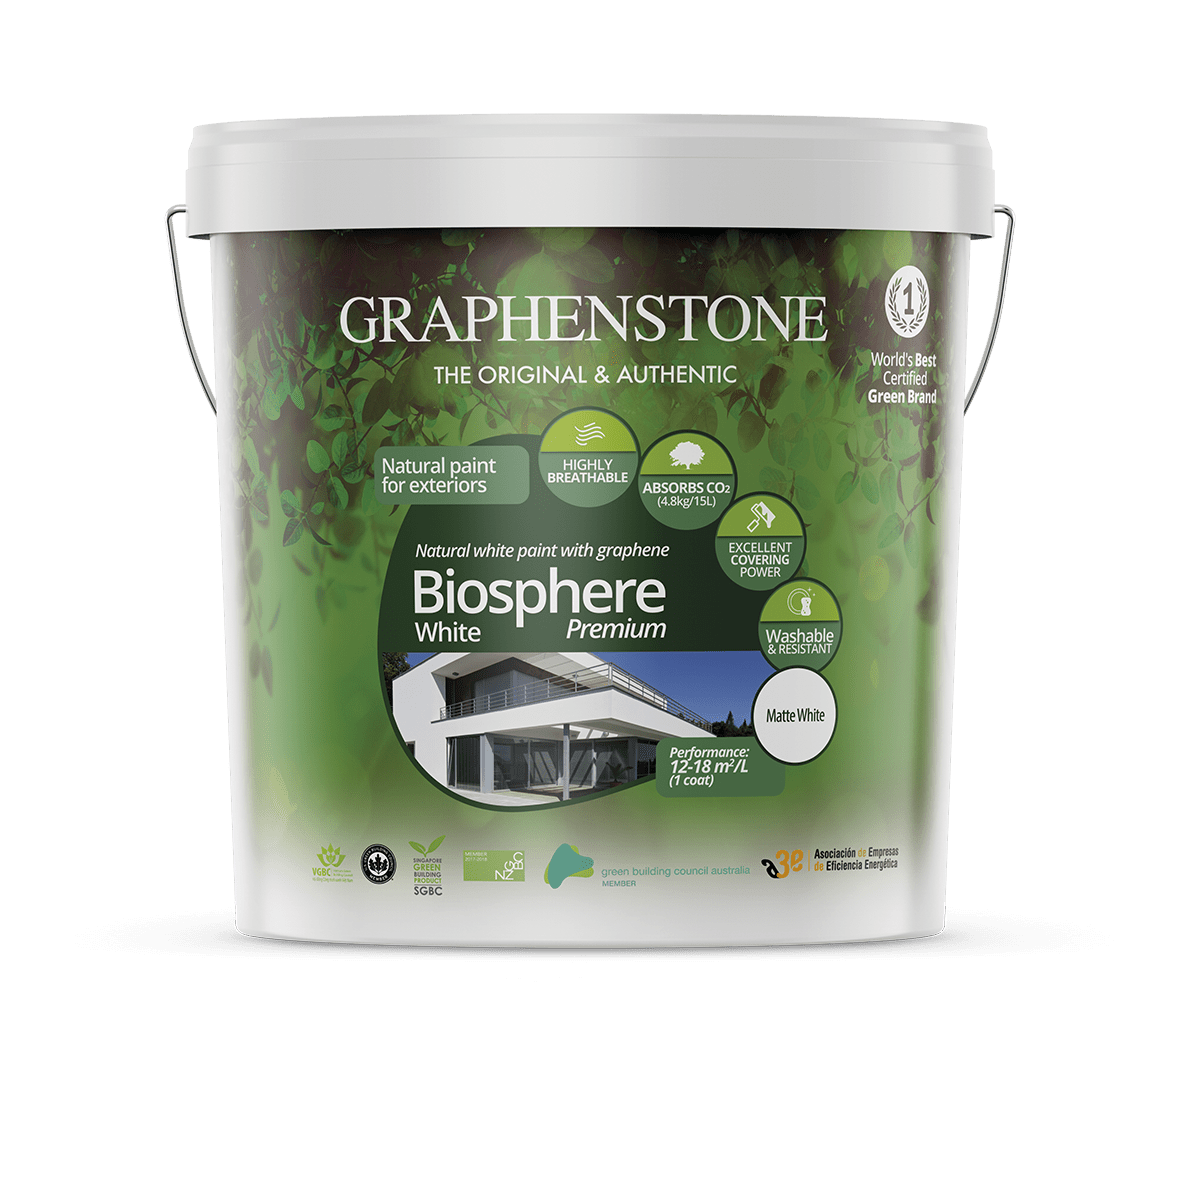 Biosphere White – Our highest quality lime paint for Exterior Masonry Highly breathable, absorbs CO2*, in White